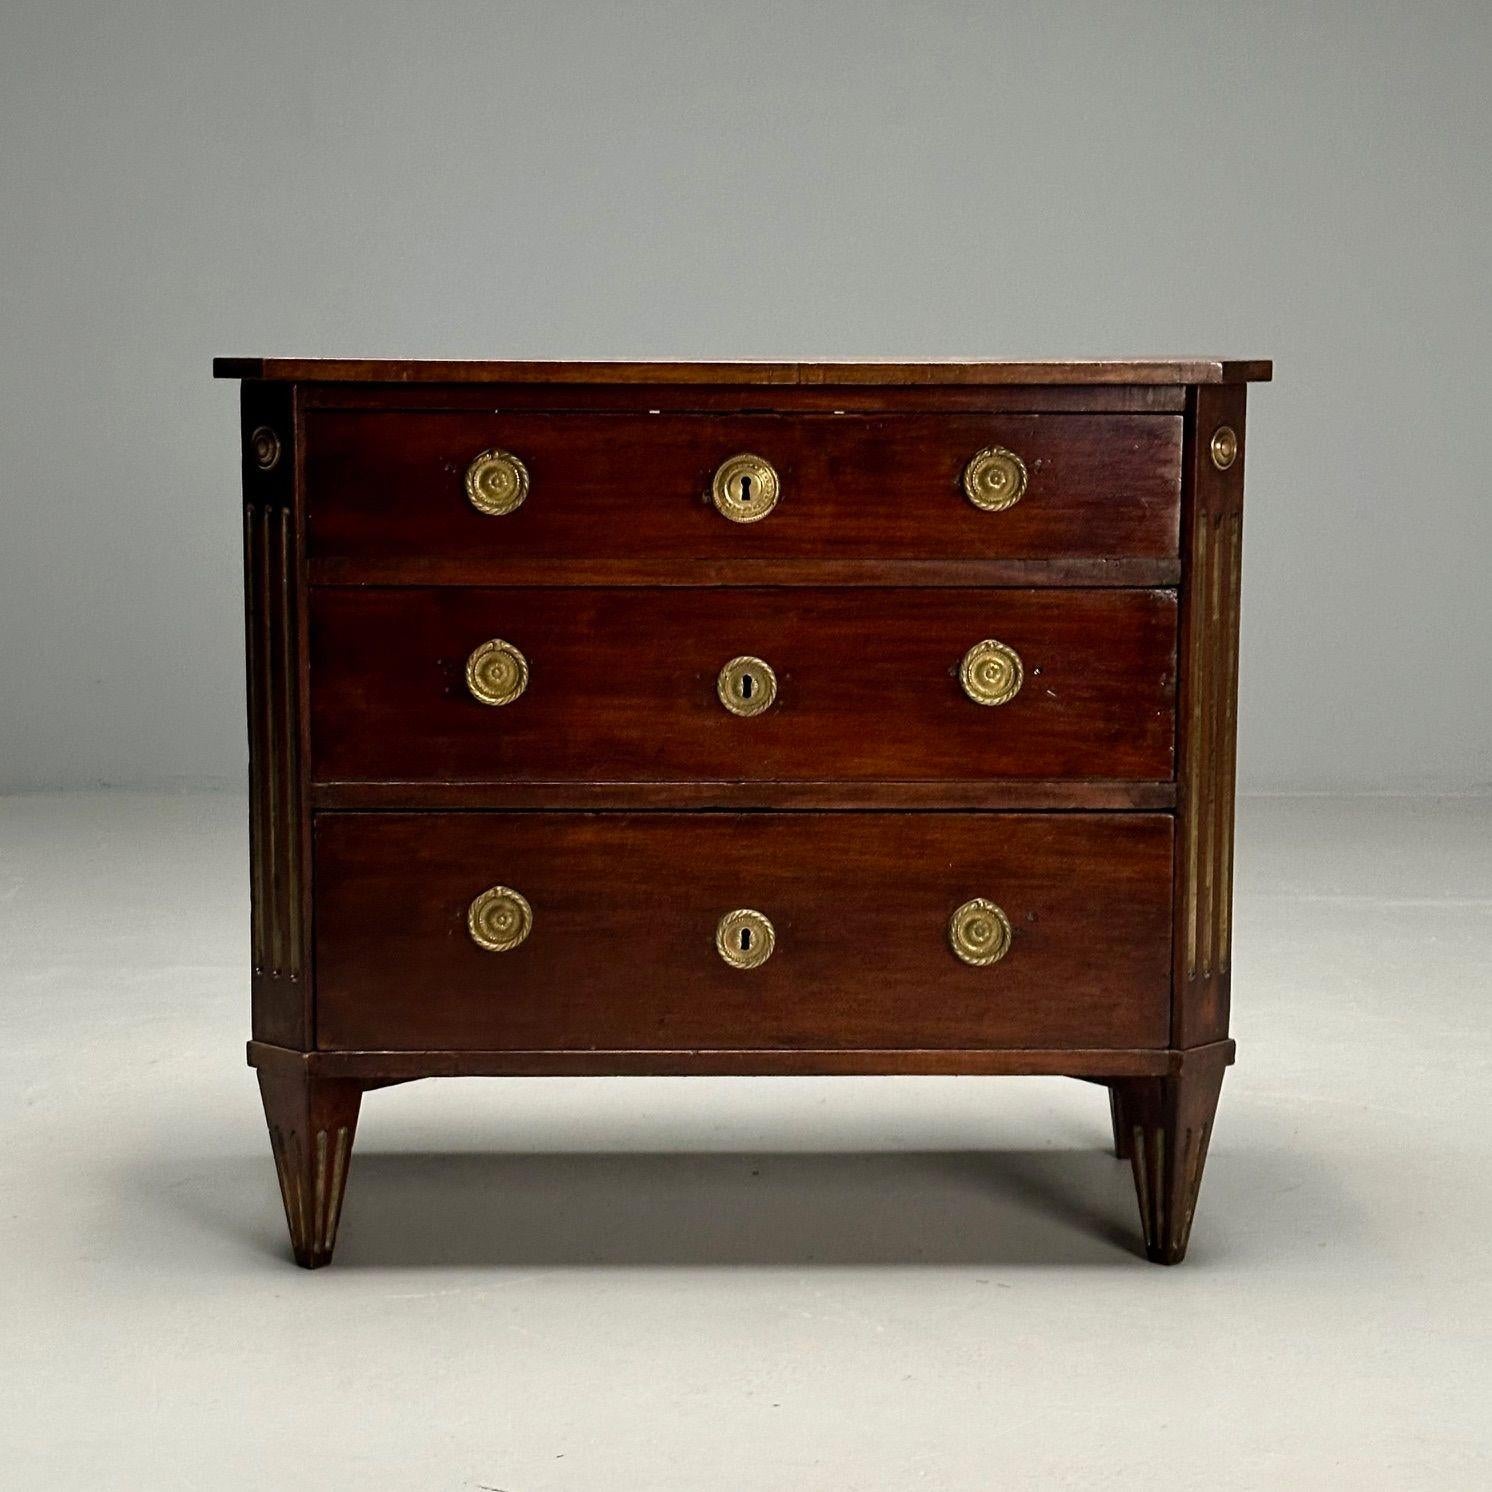 Gustavian, Louis XVI Style, Swedish Commode, Mahogany, Brass, Sweden, c. 1800s

Louis XVI style cabinet or nightstand produced in Sweden in the first half of the 19th century. This example having a dark brown Mahogany veneer, fluted sides, and three